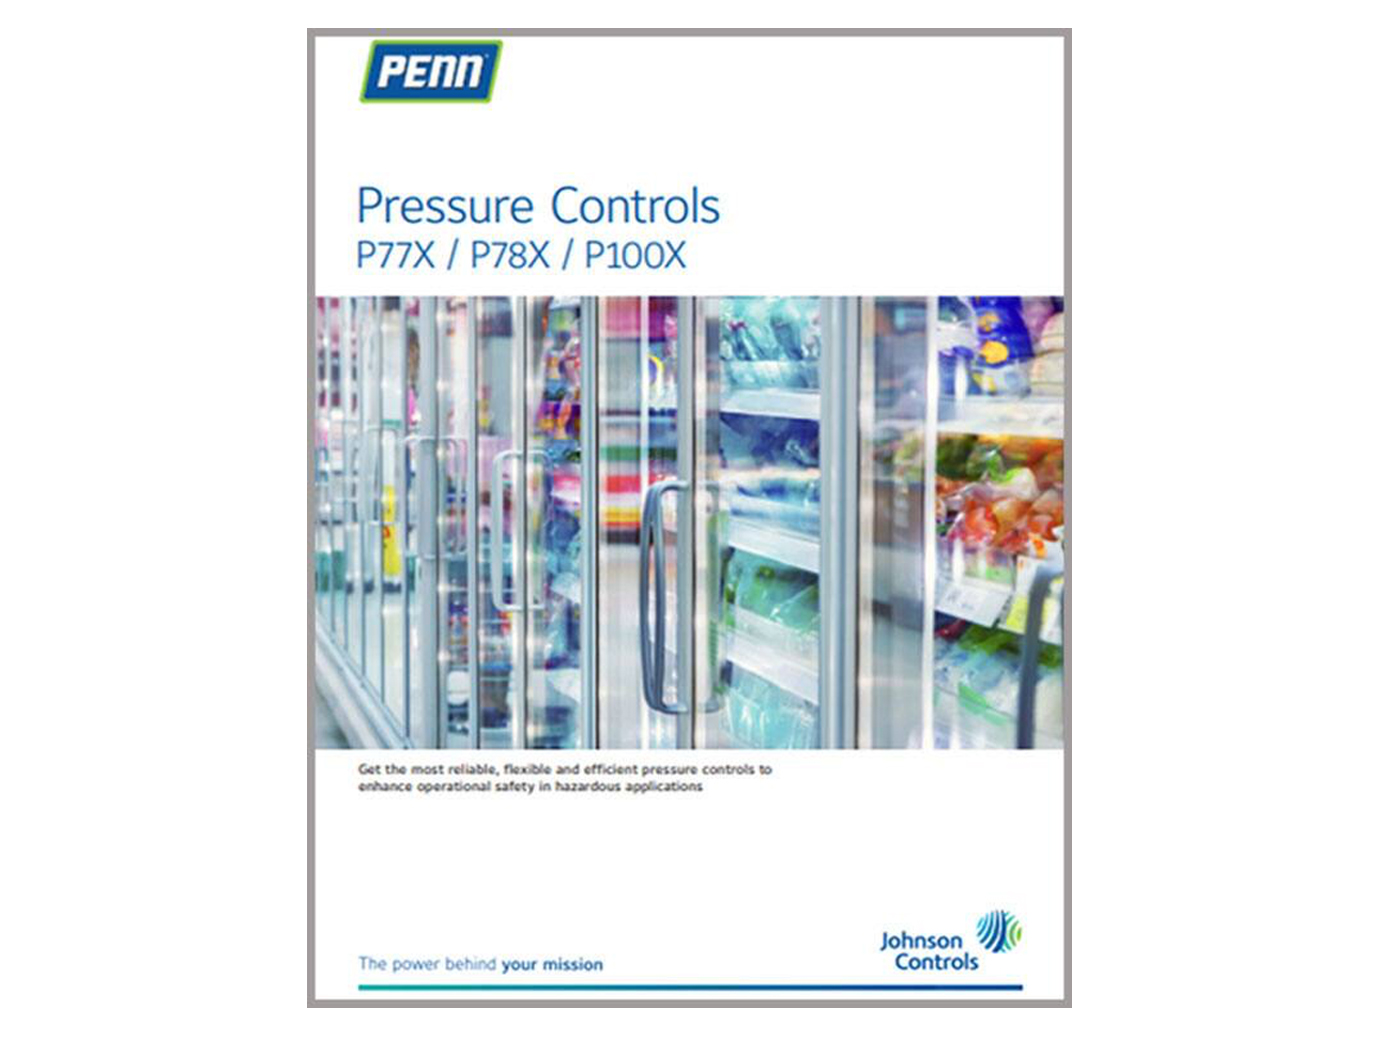 Cover page of PENN Pressure Controls: P77X - P78X - P100 brochure